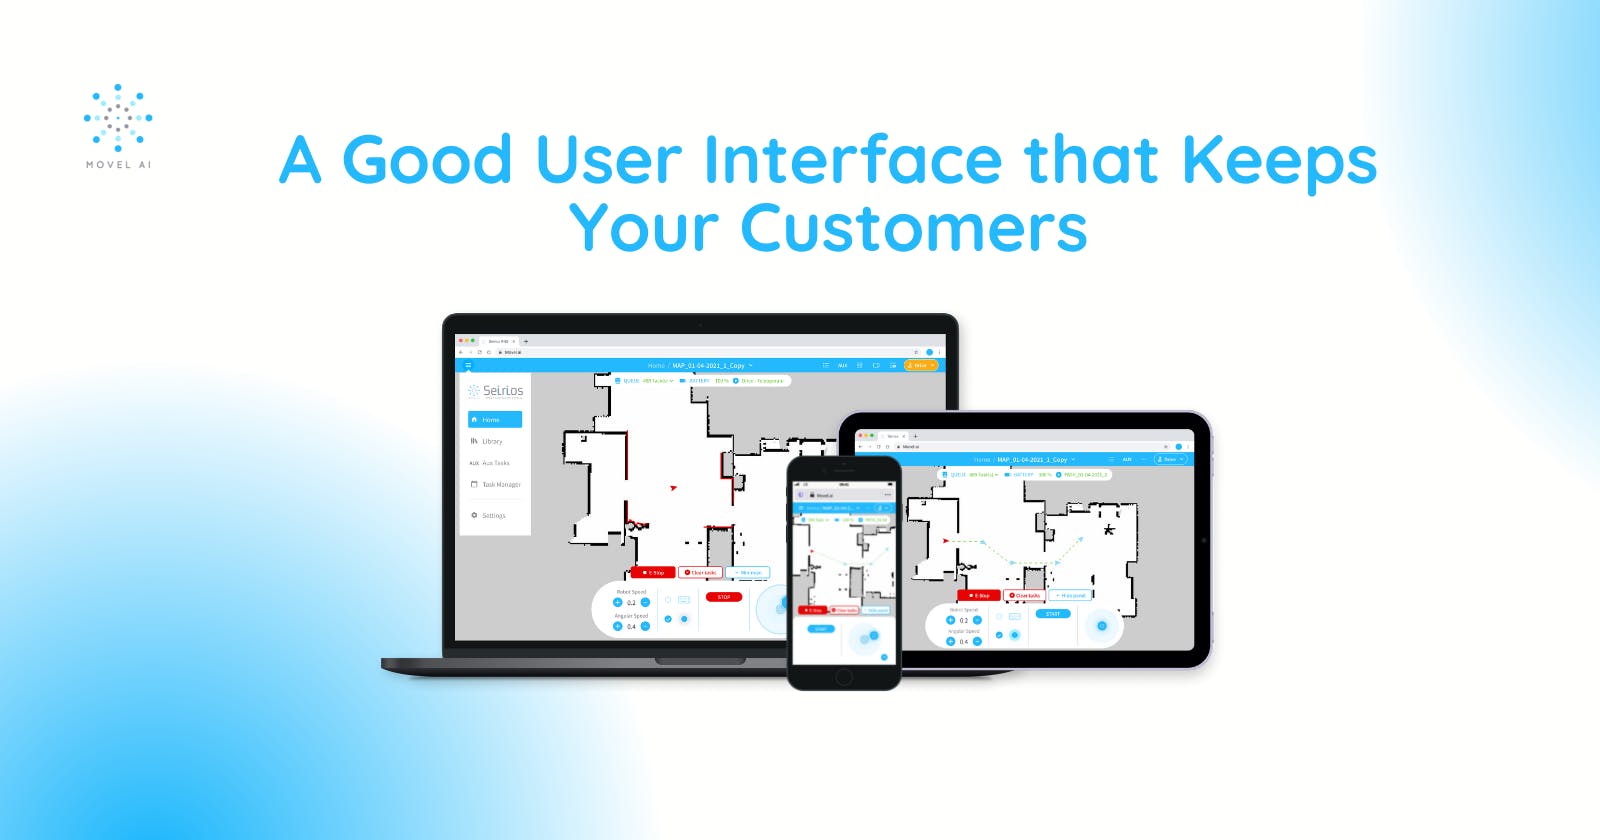 A Good User Interface that Keeps Your Customers